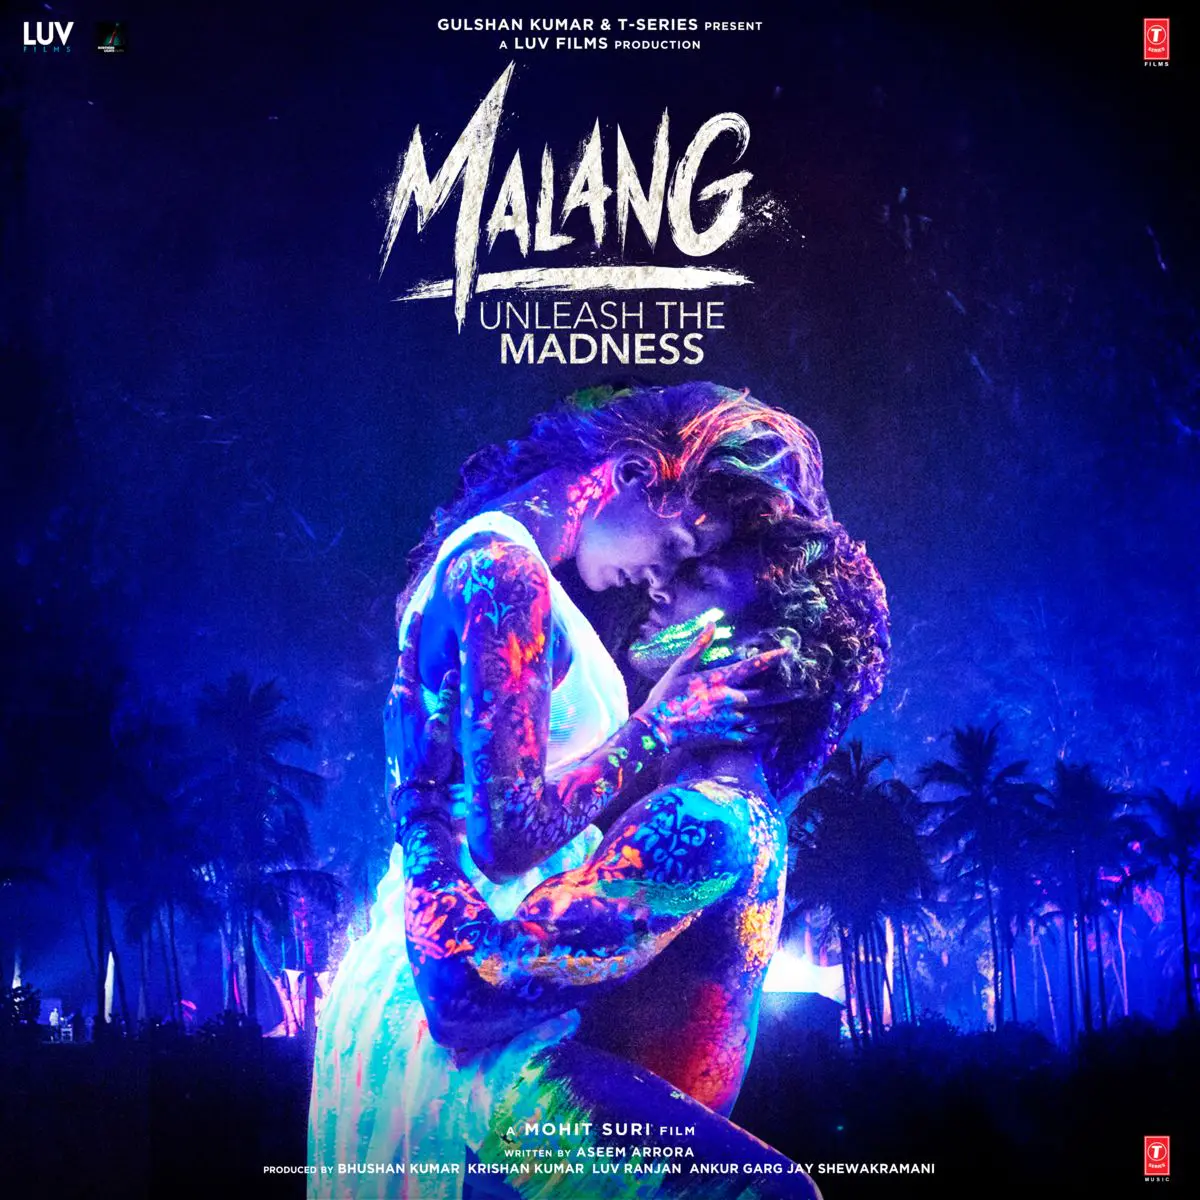 Malang Unleash The Madness Songs Download Malang Unleash The Madness Mp3 Songs Online Free On Gaana Com